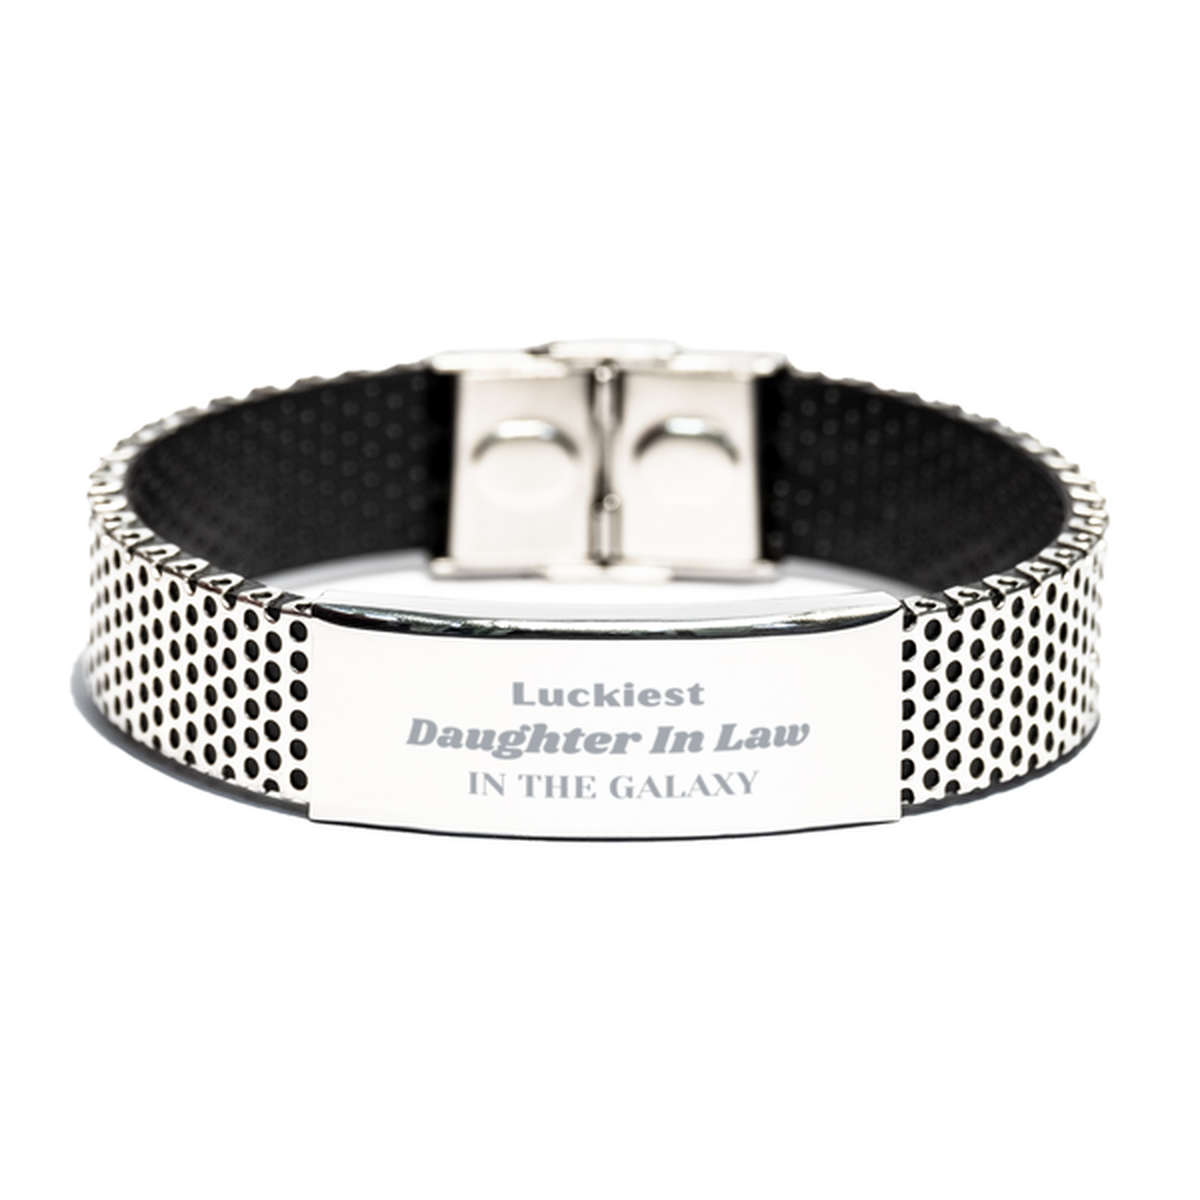 Luckiest Daughter In Law in the Galaxy, To My Daughter In Law Engraved Gifts, Christmas Daughter In Law Stainless Steel Bracelet Gifts, X-mas Birthday Unique Gifts For Daughter In Law Men Women